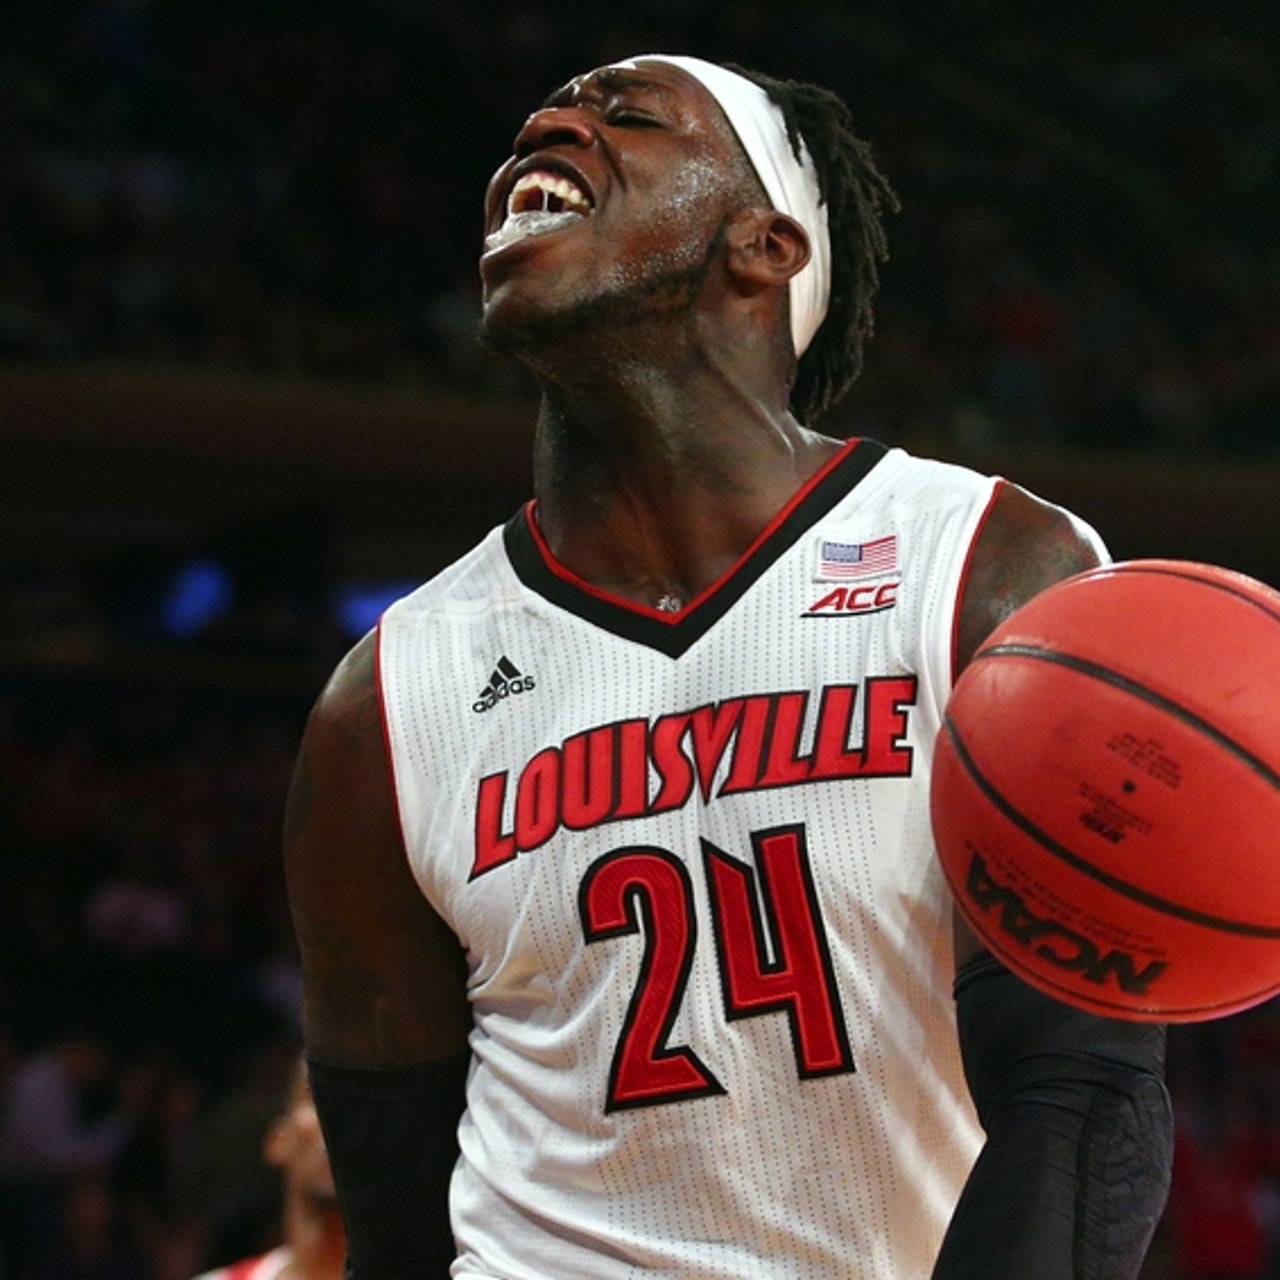 3 teams for former Louisville basketball star Montrezl Harrell to consider